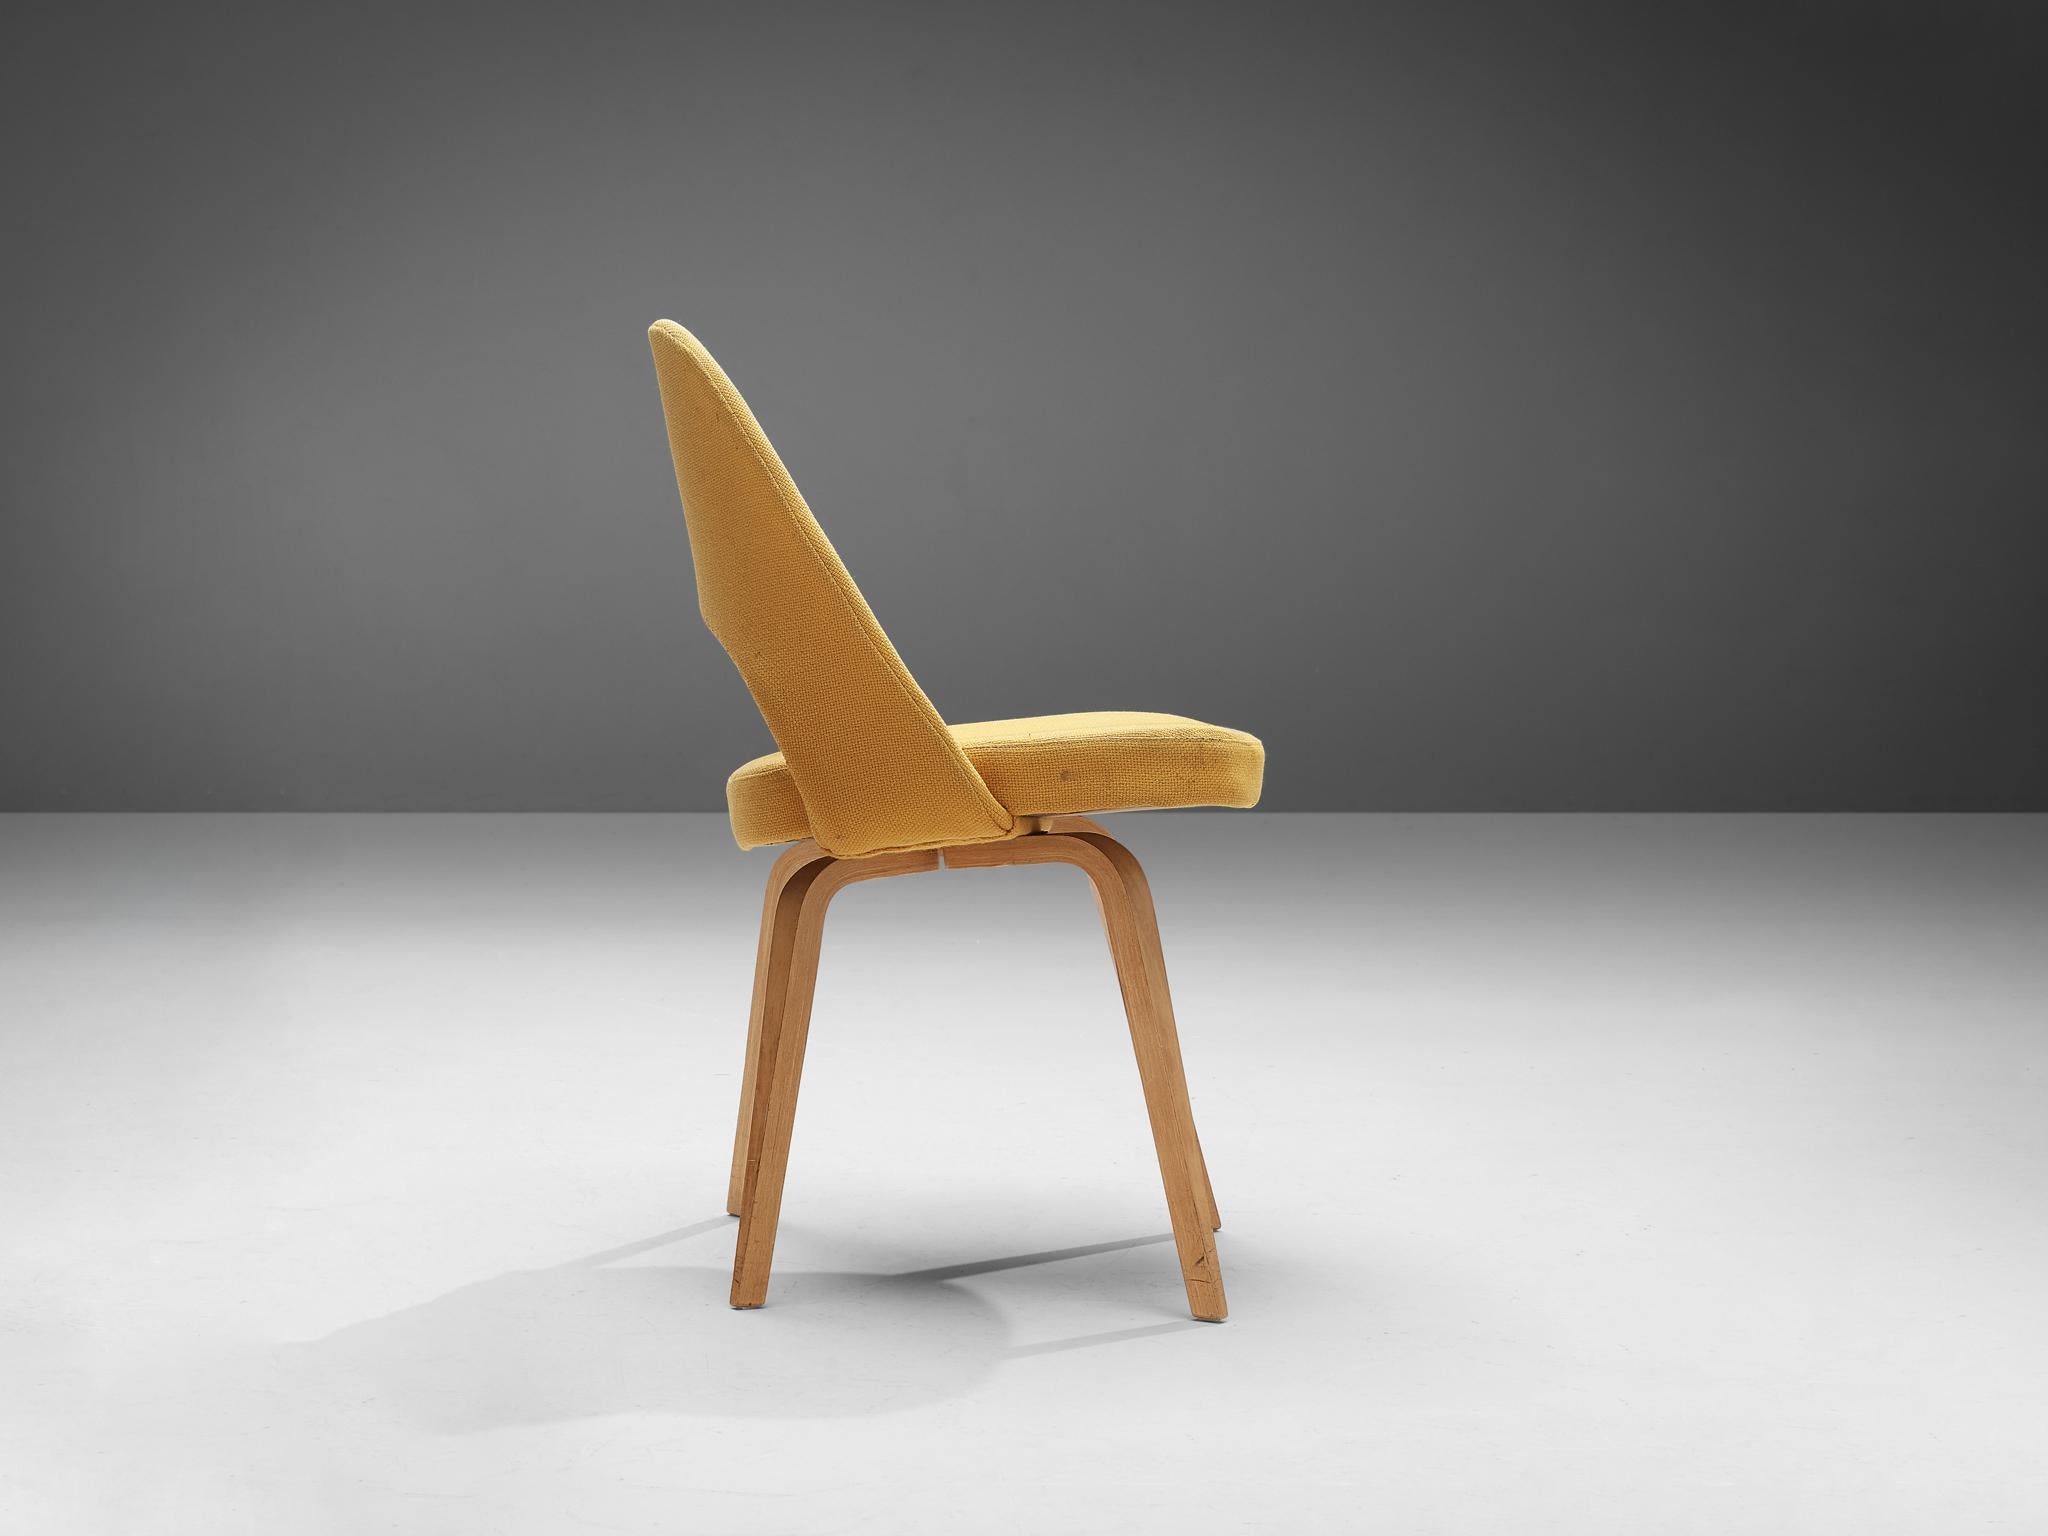 Mid-20th Century Eero Saarinen for Knoll 'Executive' Dining Chair in Ocher Yellow Upholstery  For Sale